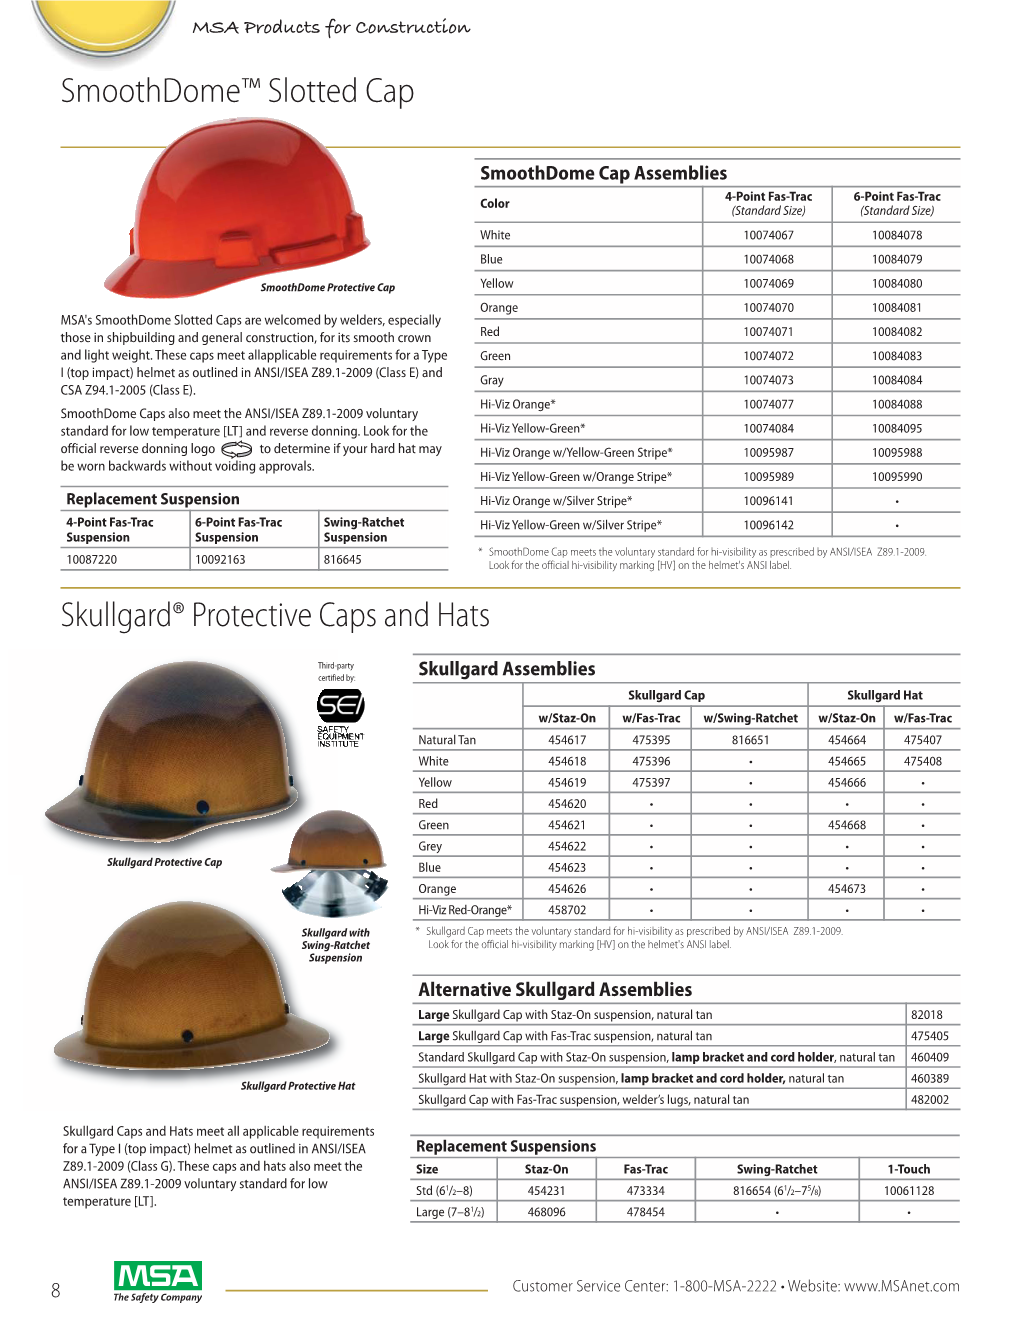 Smoothdome™ Slotted Cap Skullgard® Protective Caps and Hats